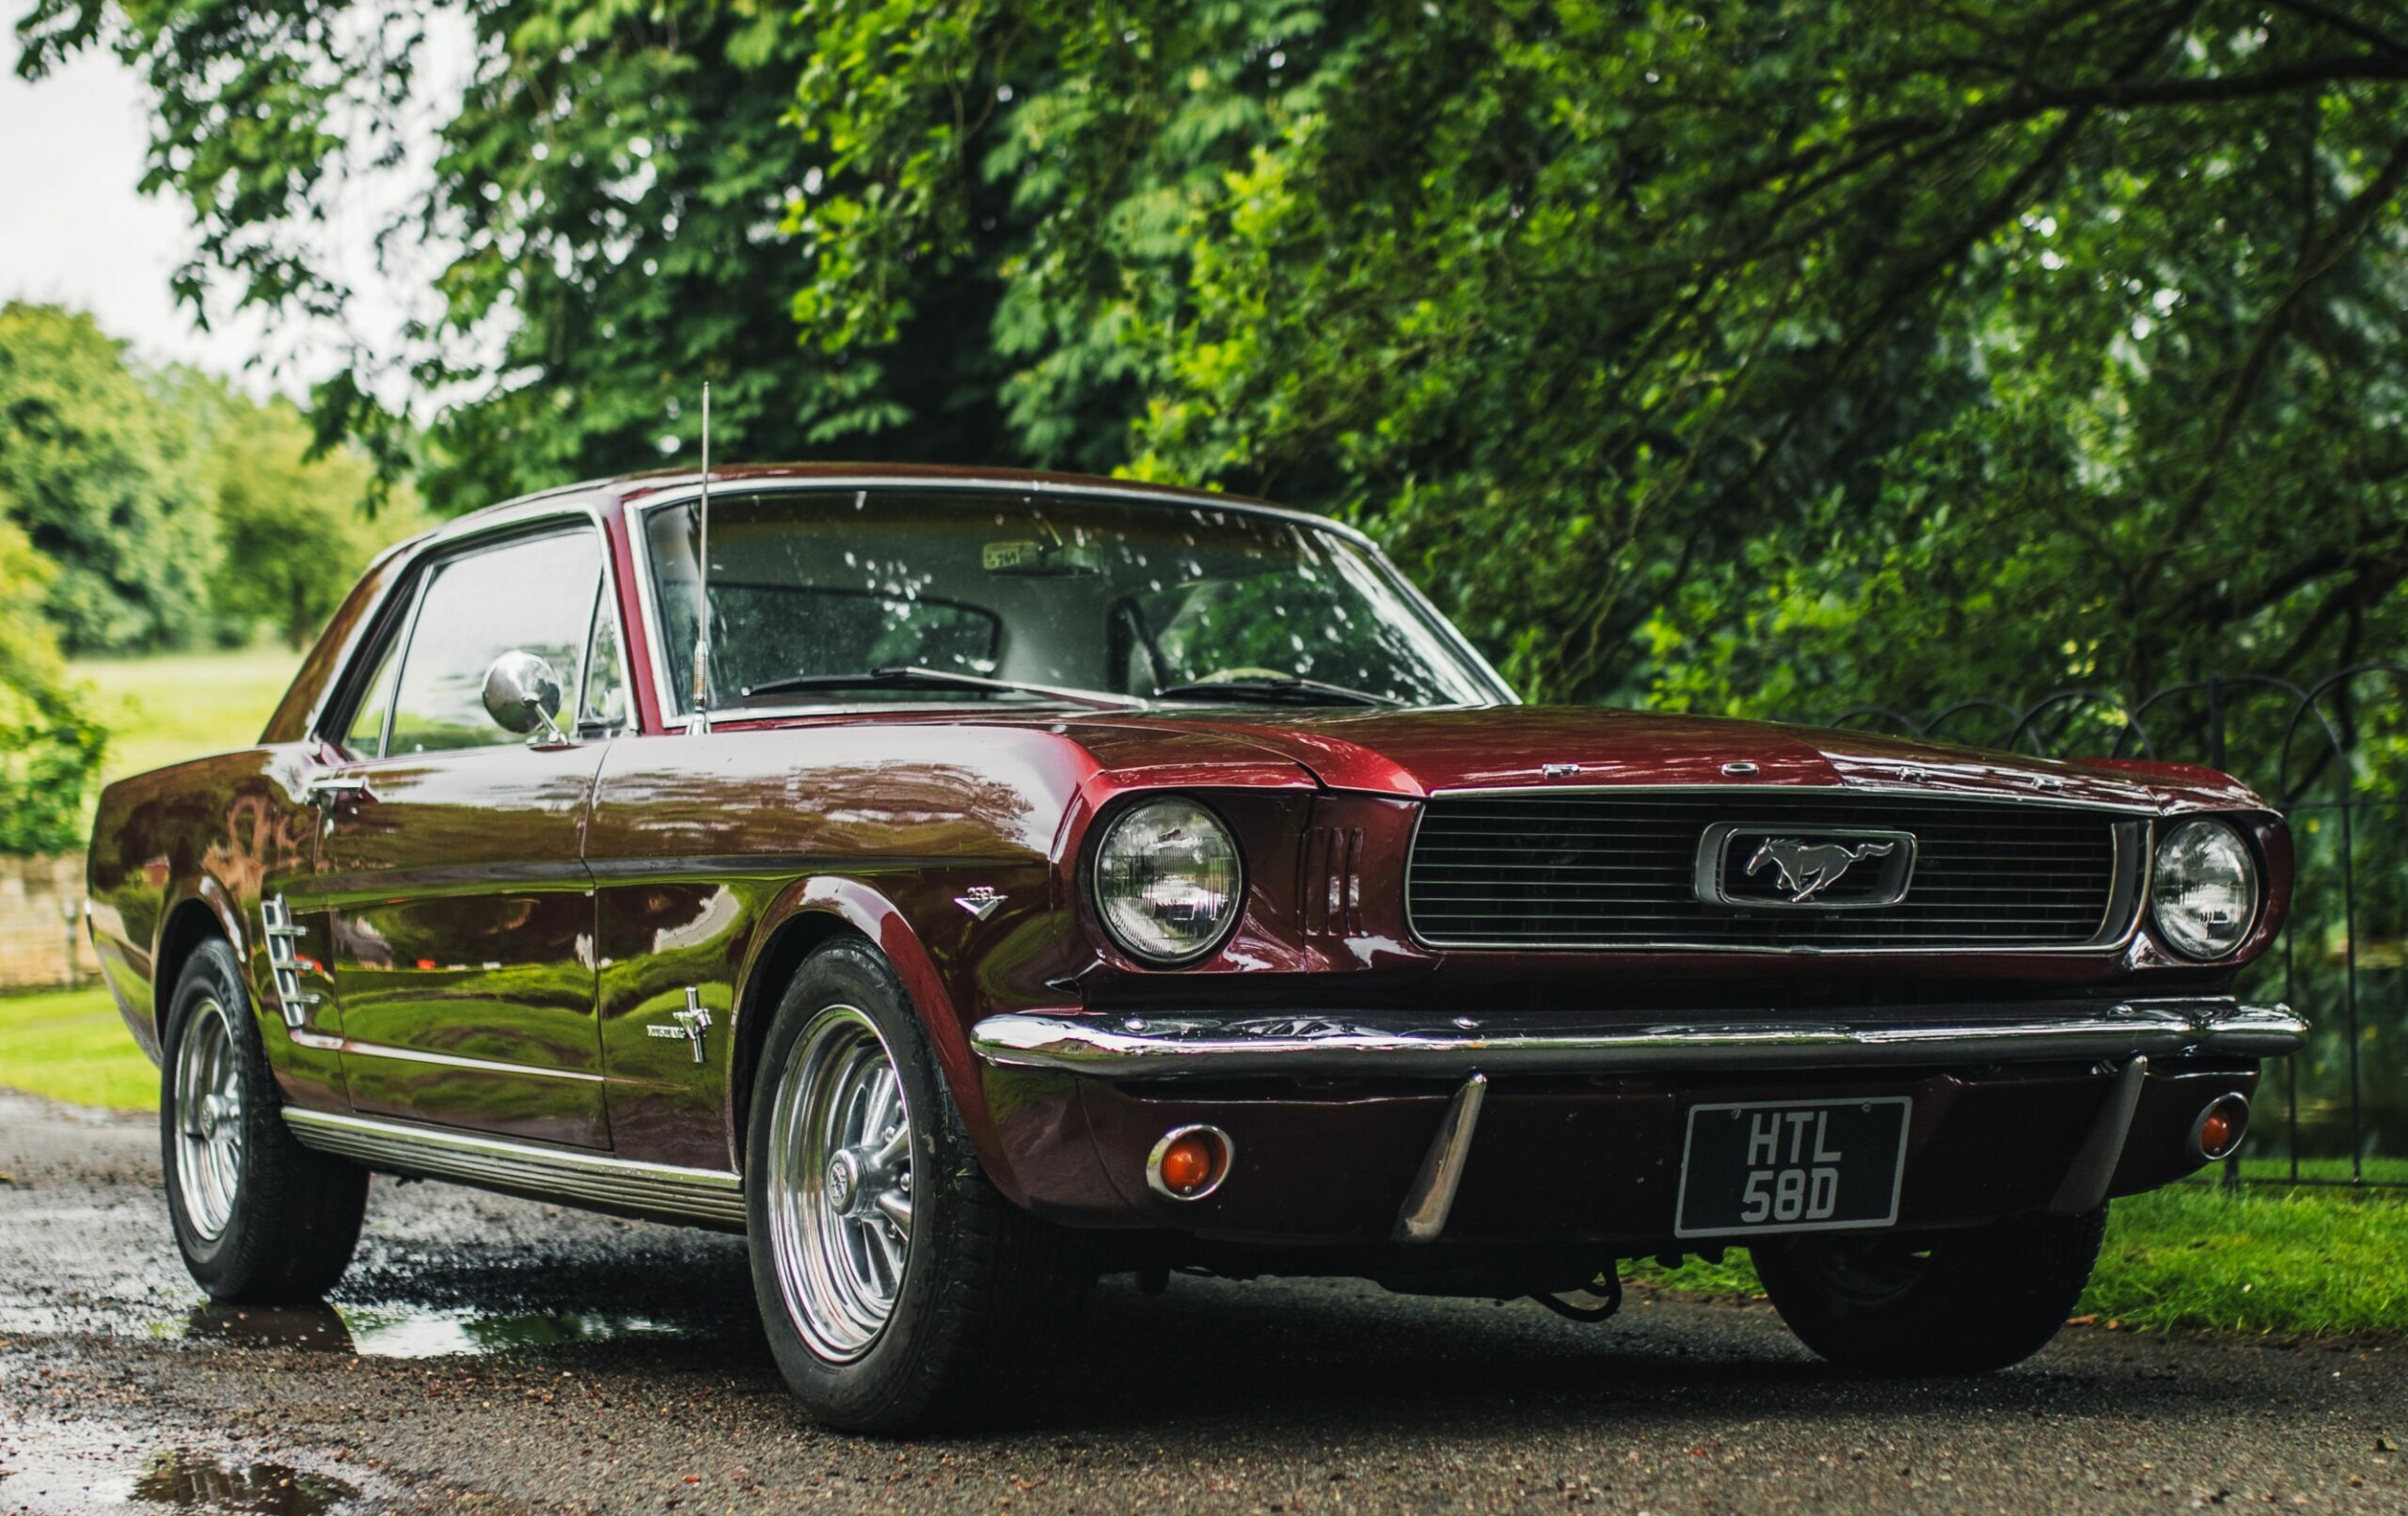 1966 Ford Mustang Notchback Evoke Classics classic cars auction online